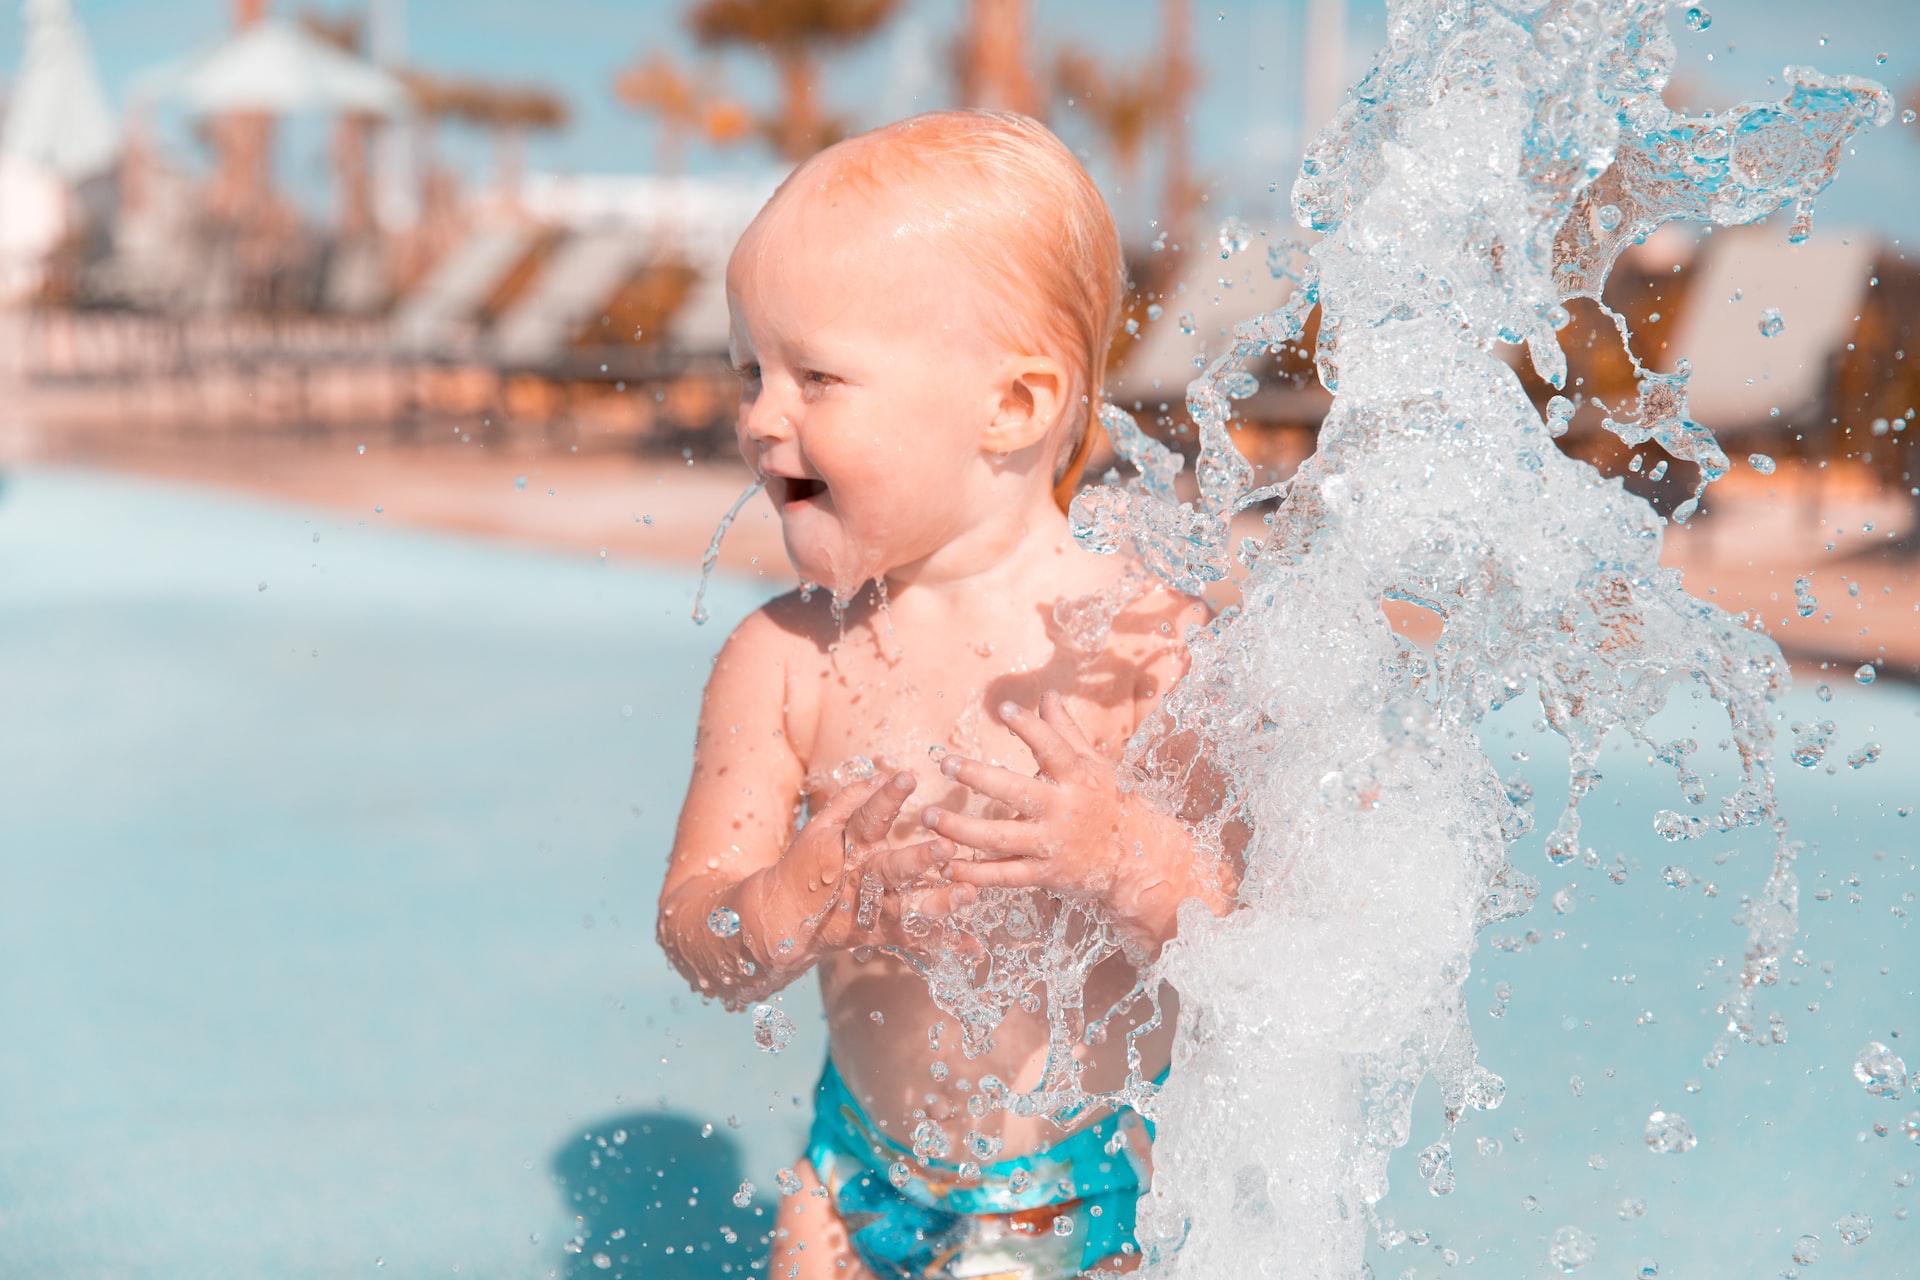 An infant at a waterpark.